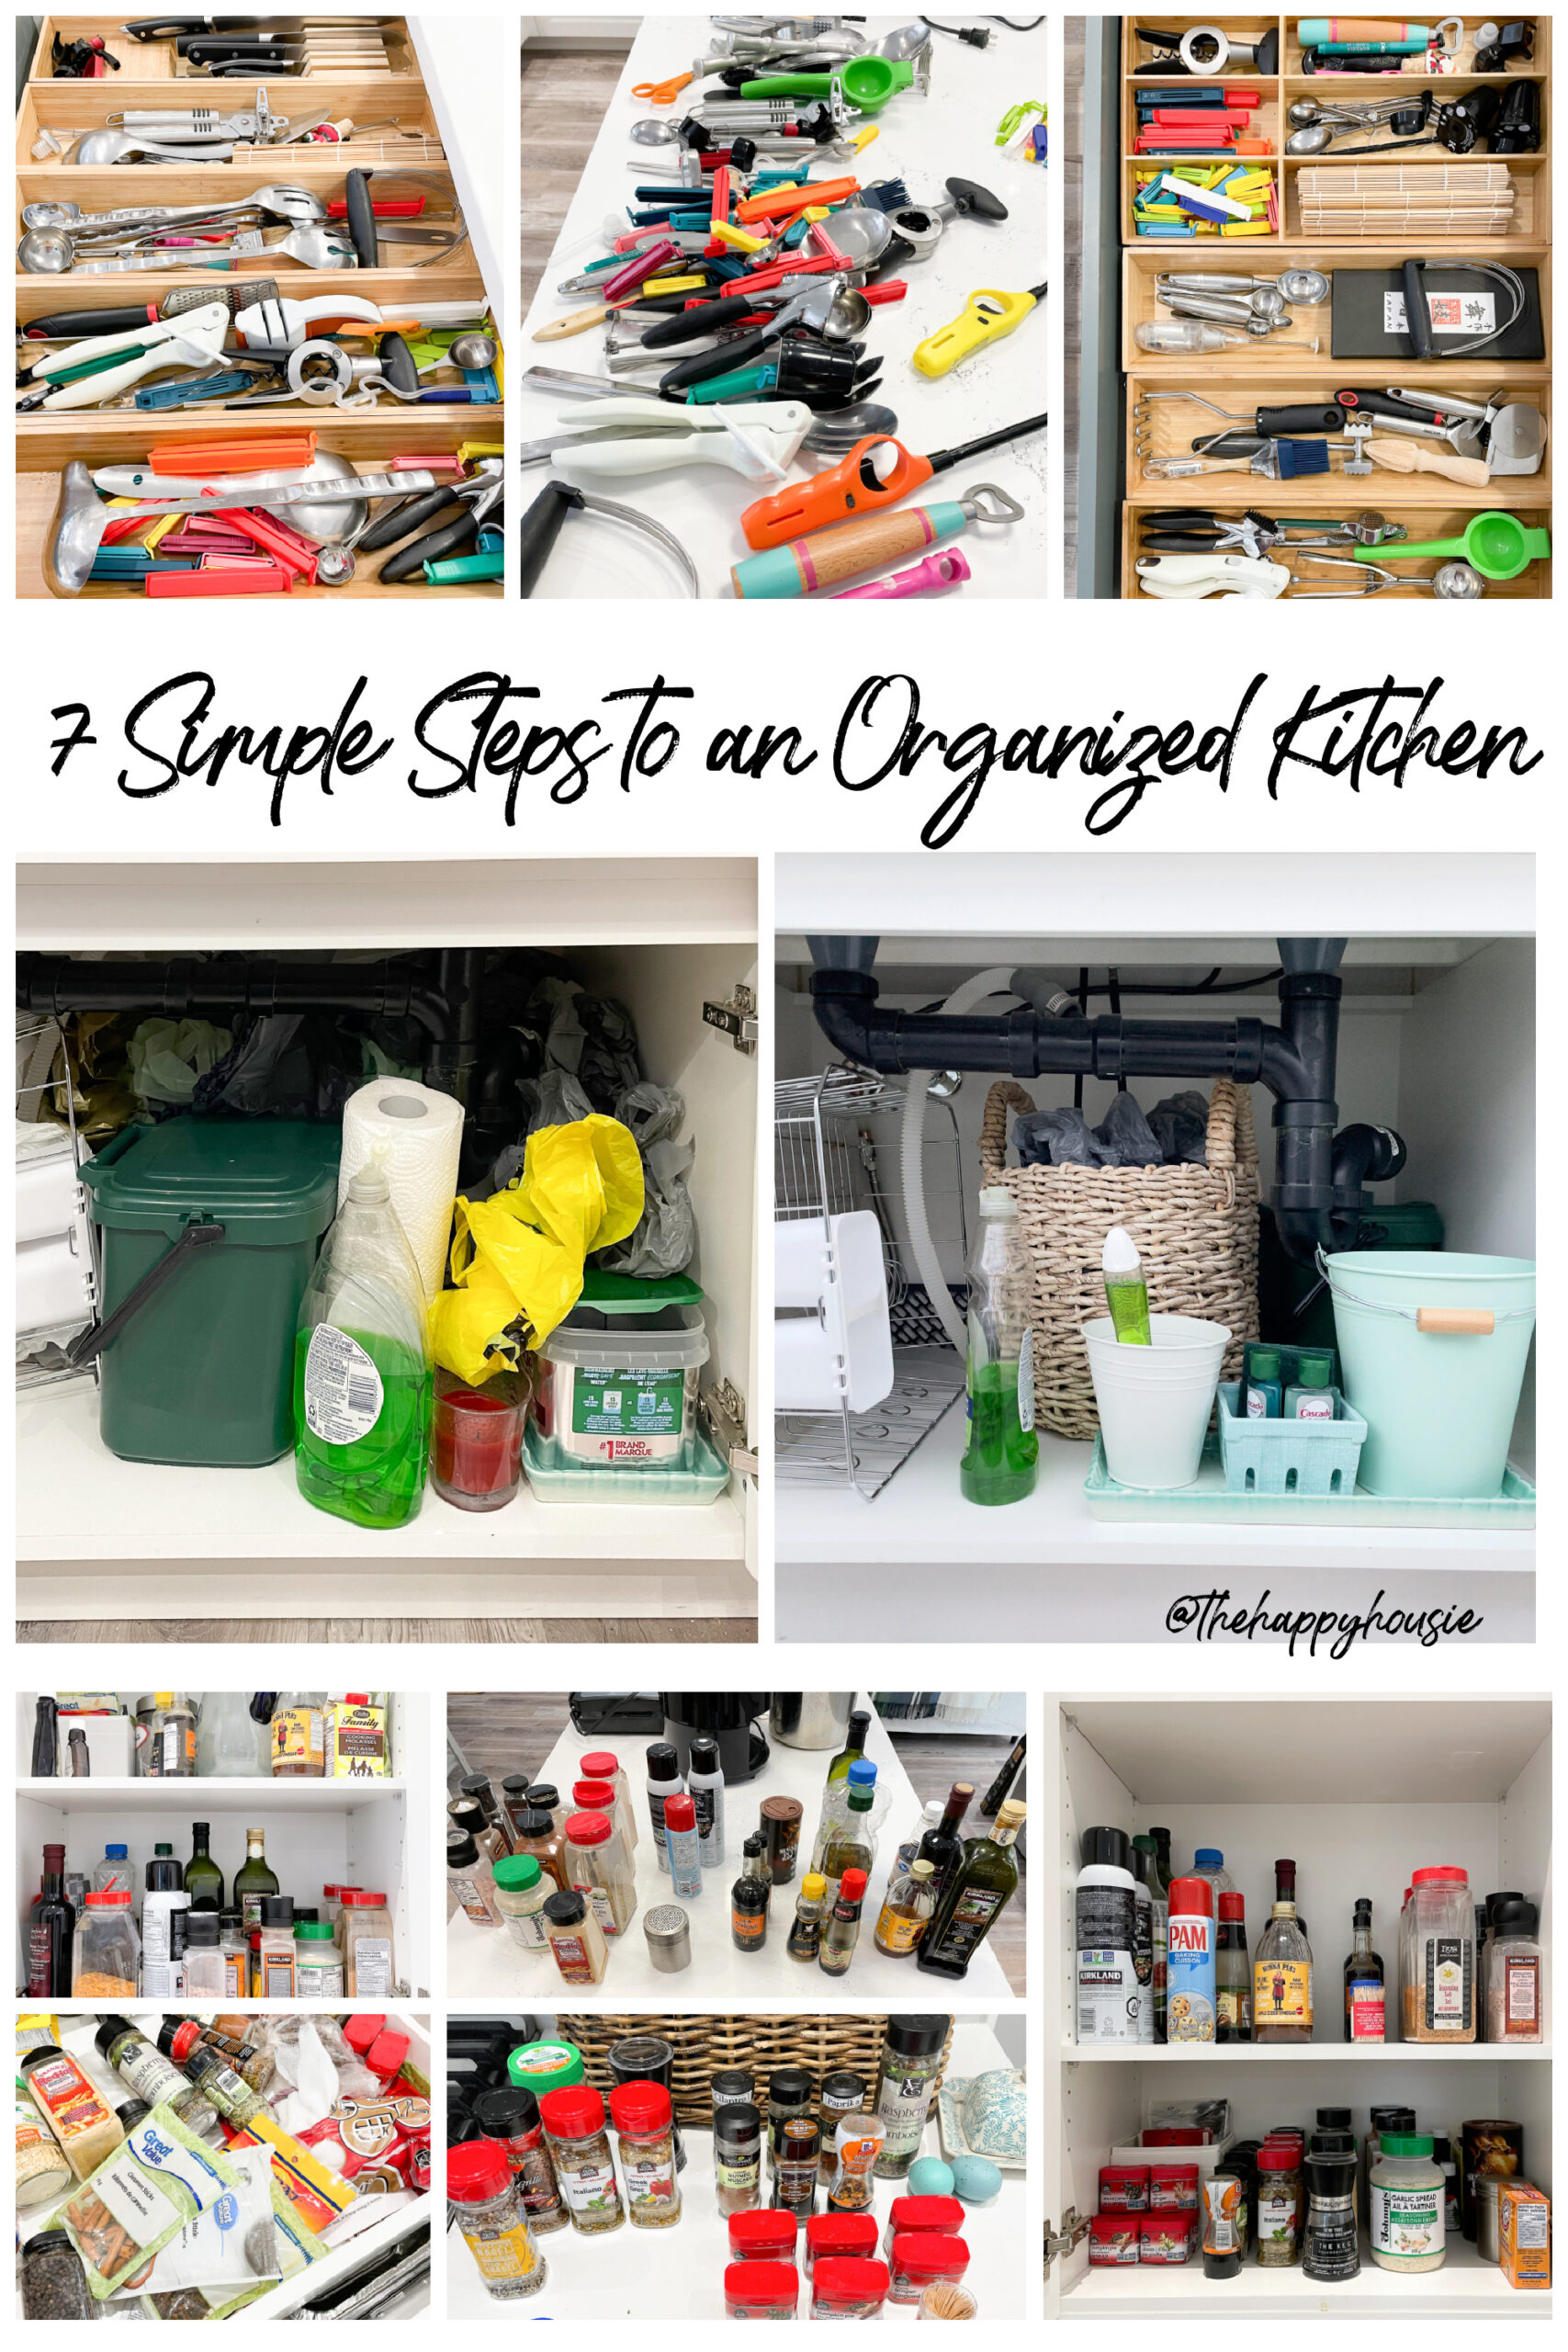 The Easiest Way to Organize Food Storage Containers ~ Organize Your Kitchen  Frugally Day 7 - Organizing Homelife